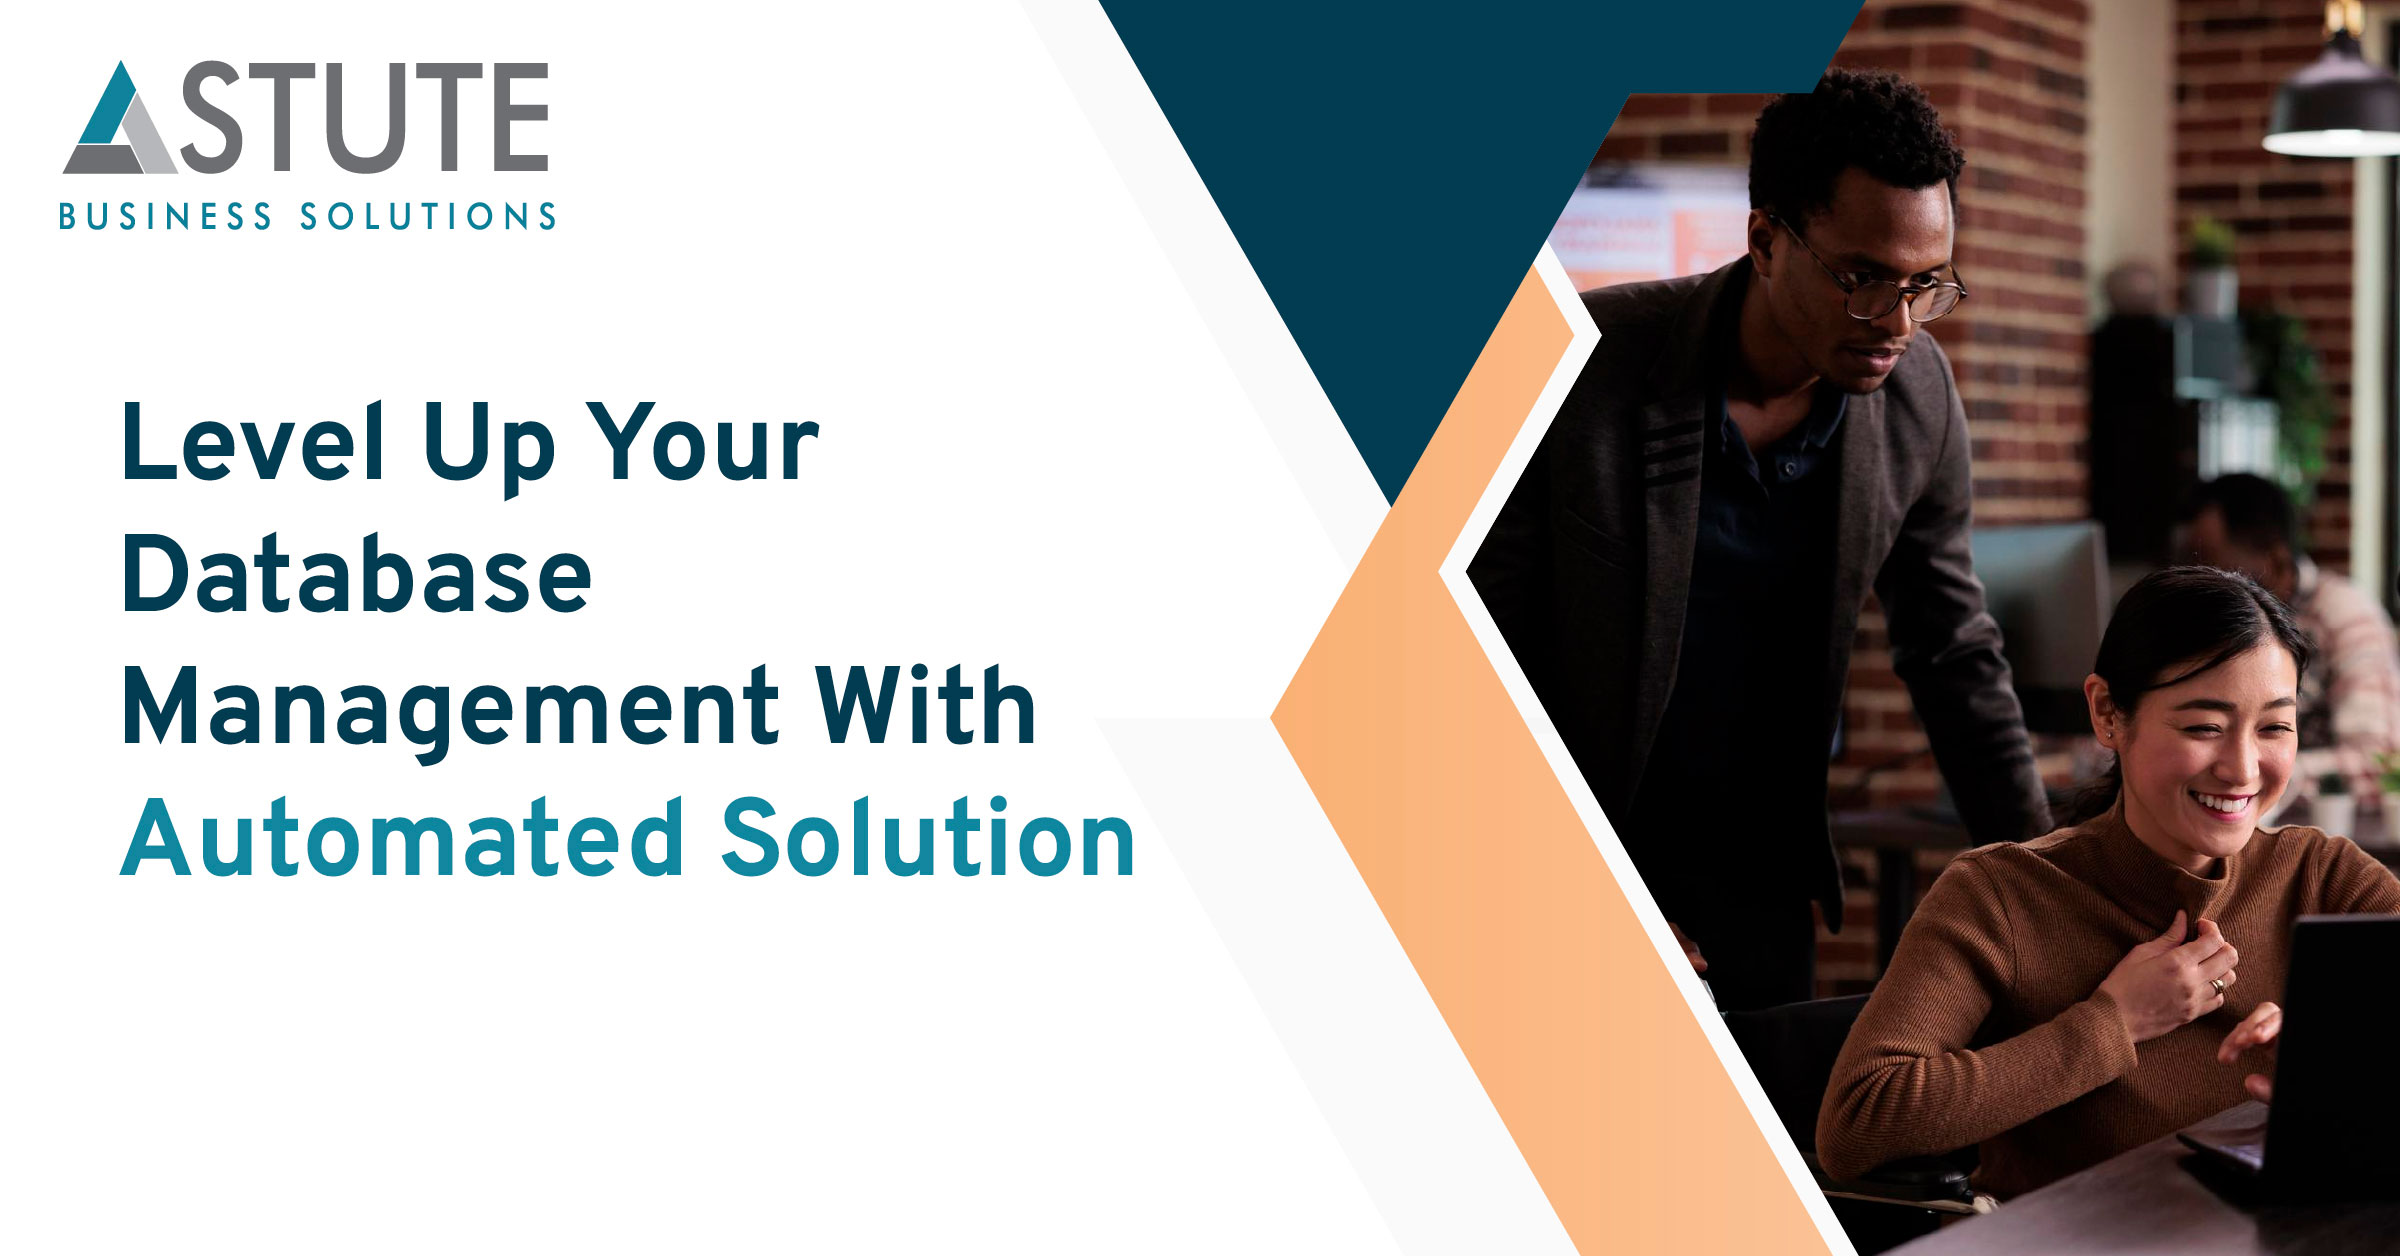 Level Up Your Database Management With Automated Solution